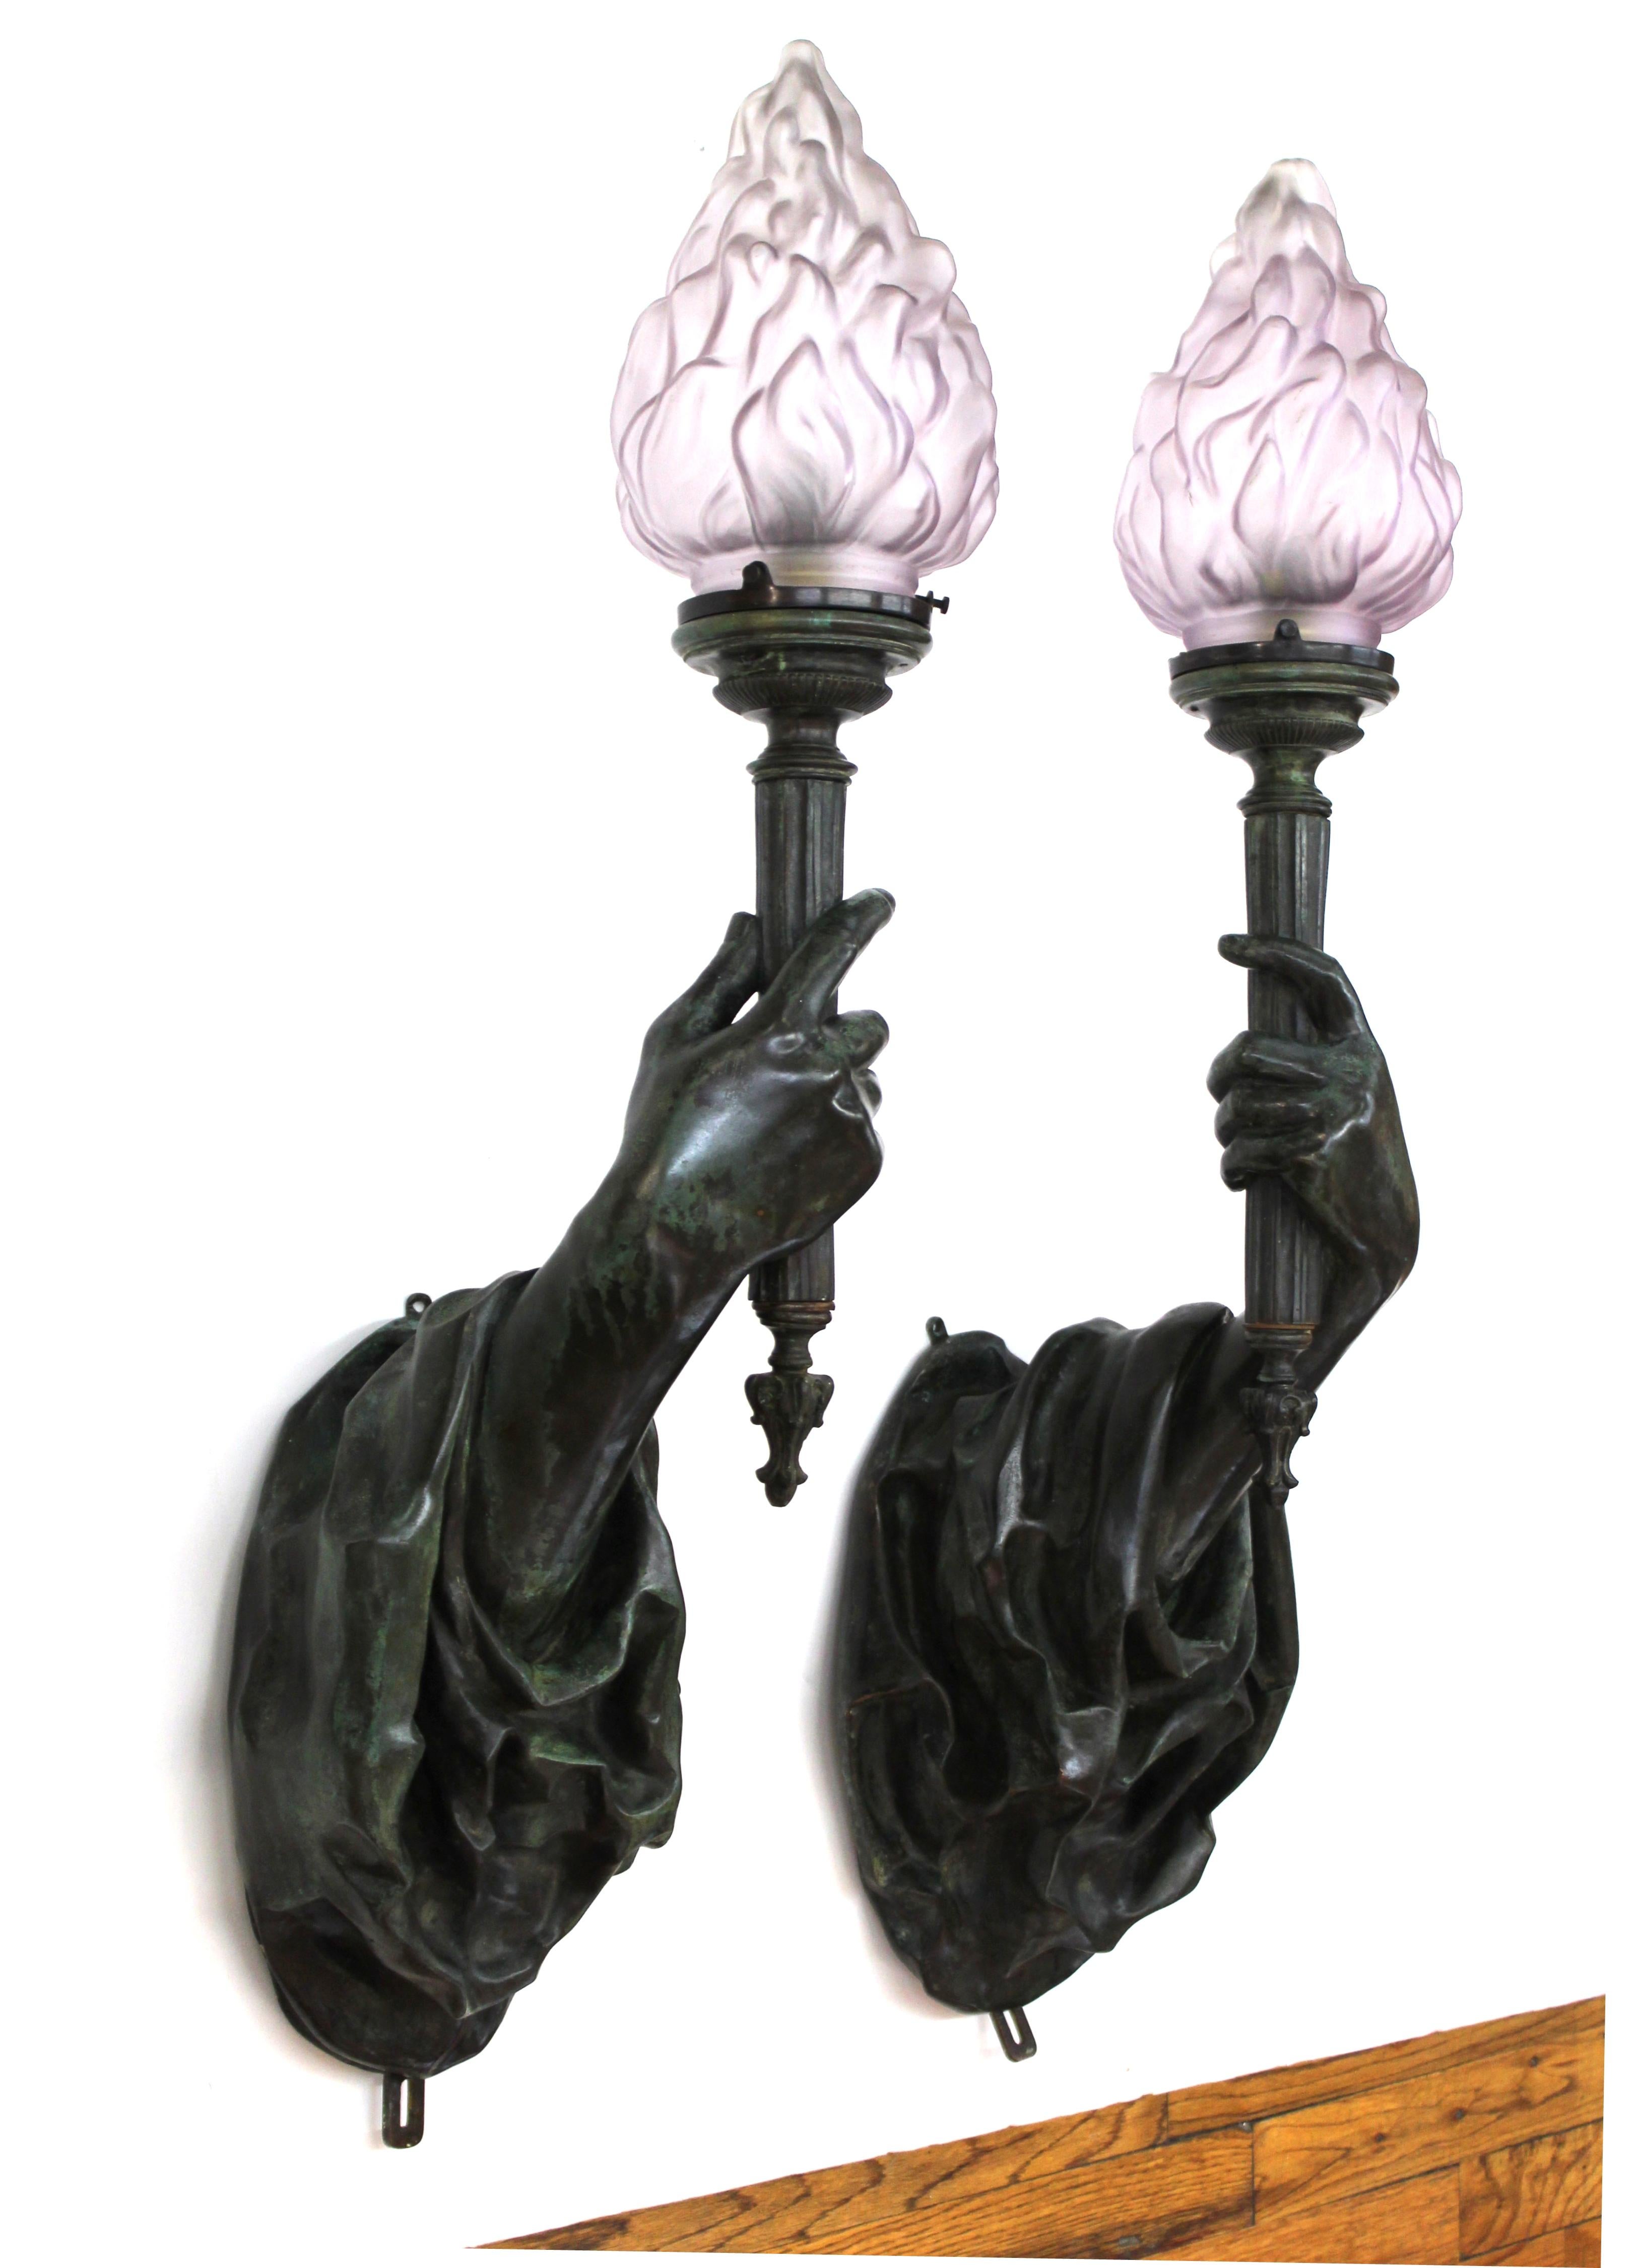 American Gilded Age or Belle Époque pair of heavy patinated cast bronze hand torchiere wall sconces, attributed to Edward F. Caldwell & Co. in New York City. The pair of sconces has elaborate drapery from which life-sized hands emerge, holding up